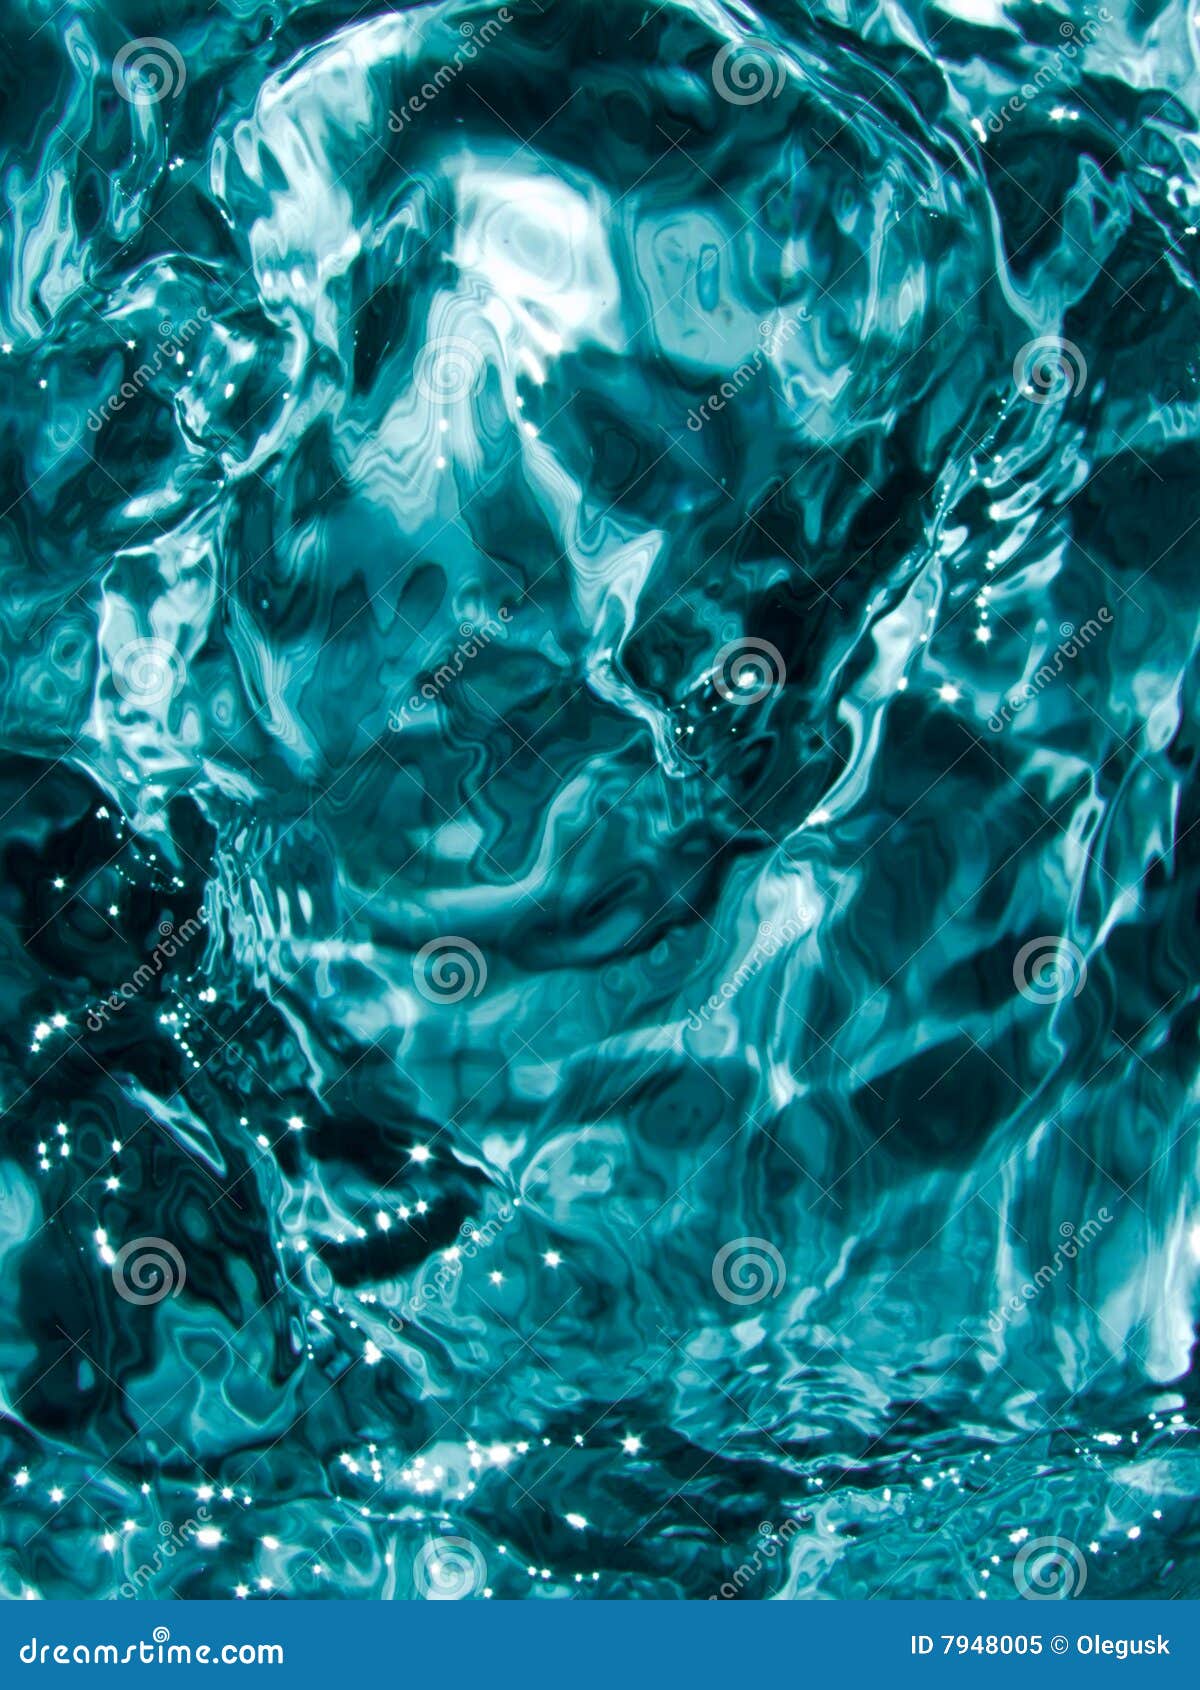 water in movement